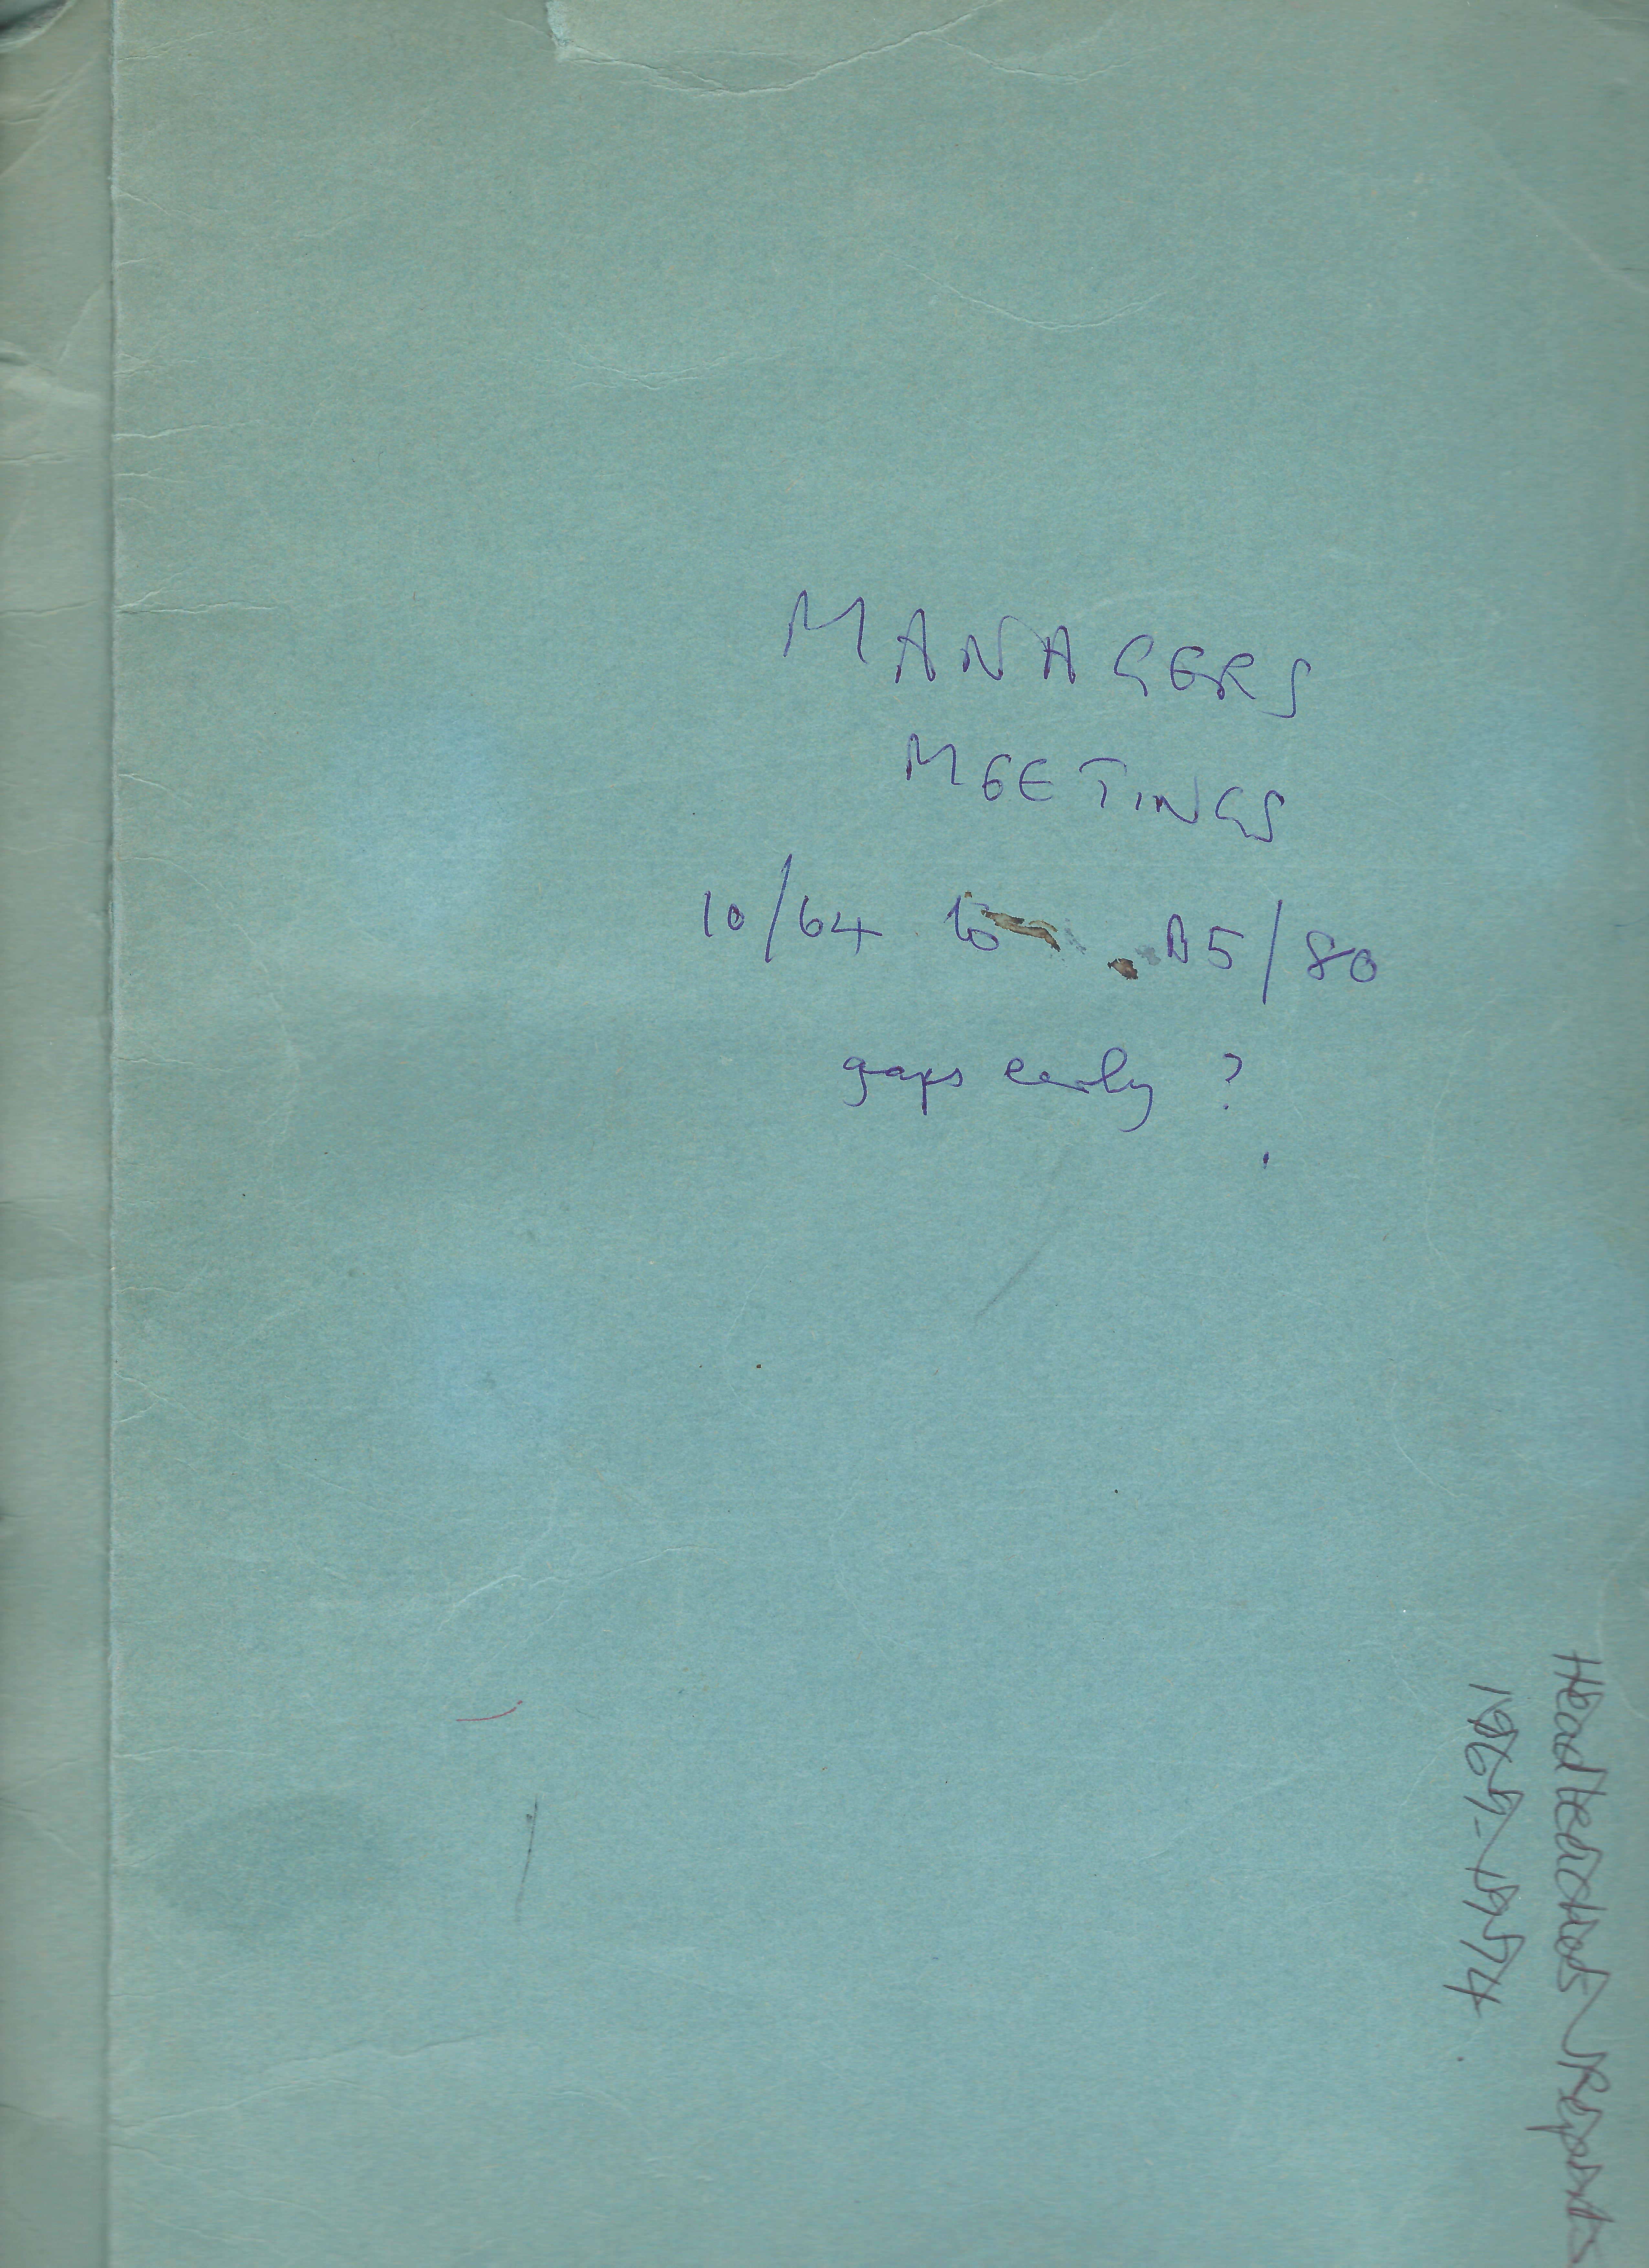 Cover of the folder